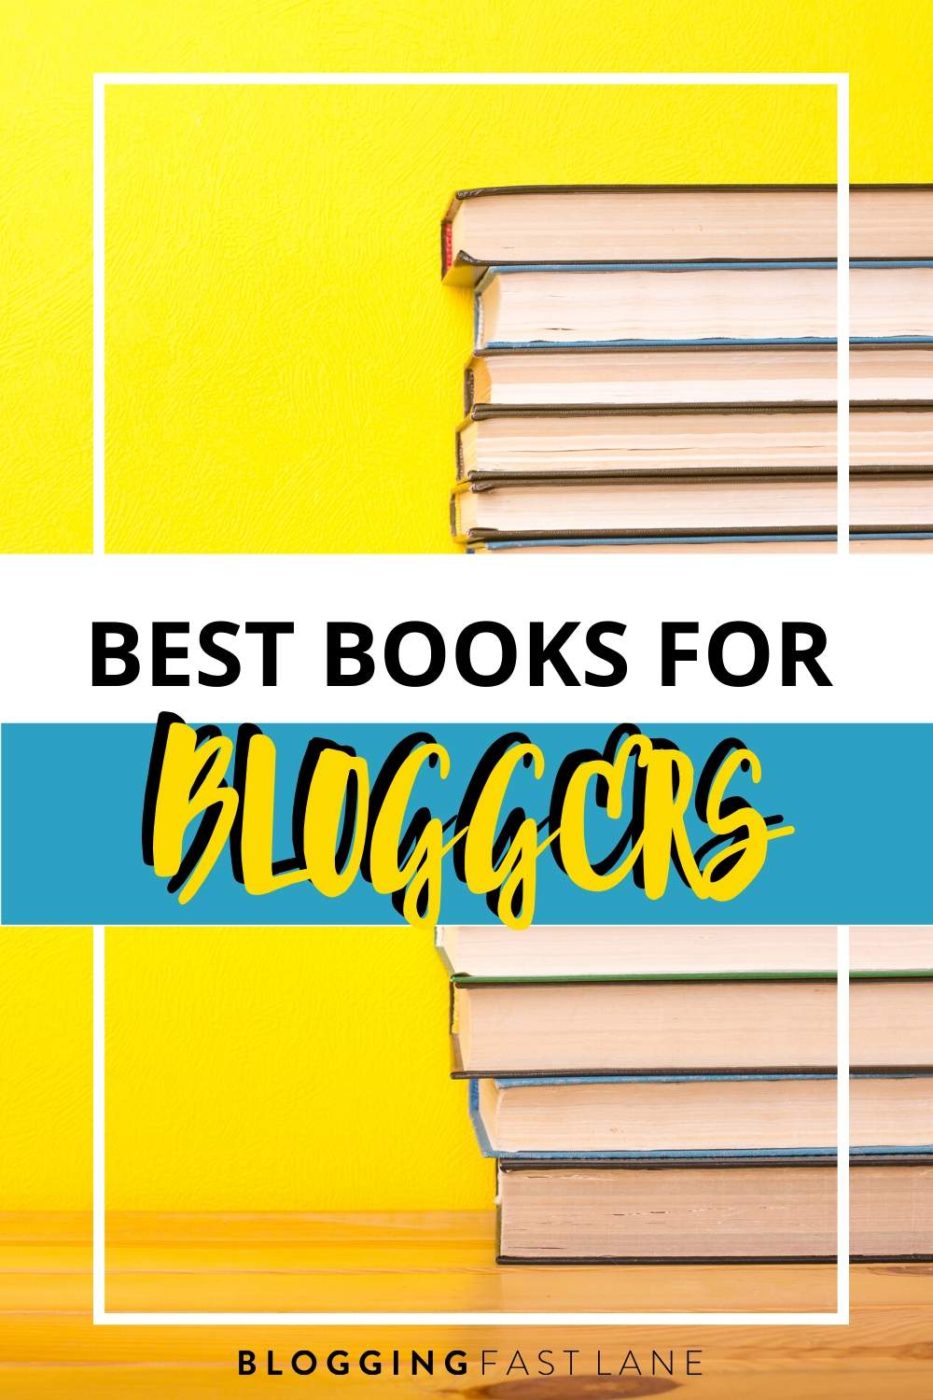 Best Books for Bloggers | Top picks for books on mindset, business, productivity and more... to help you succeed as a blogger!